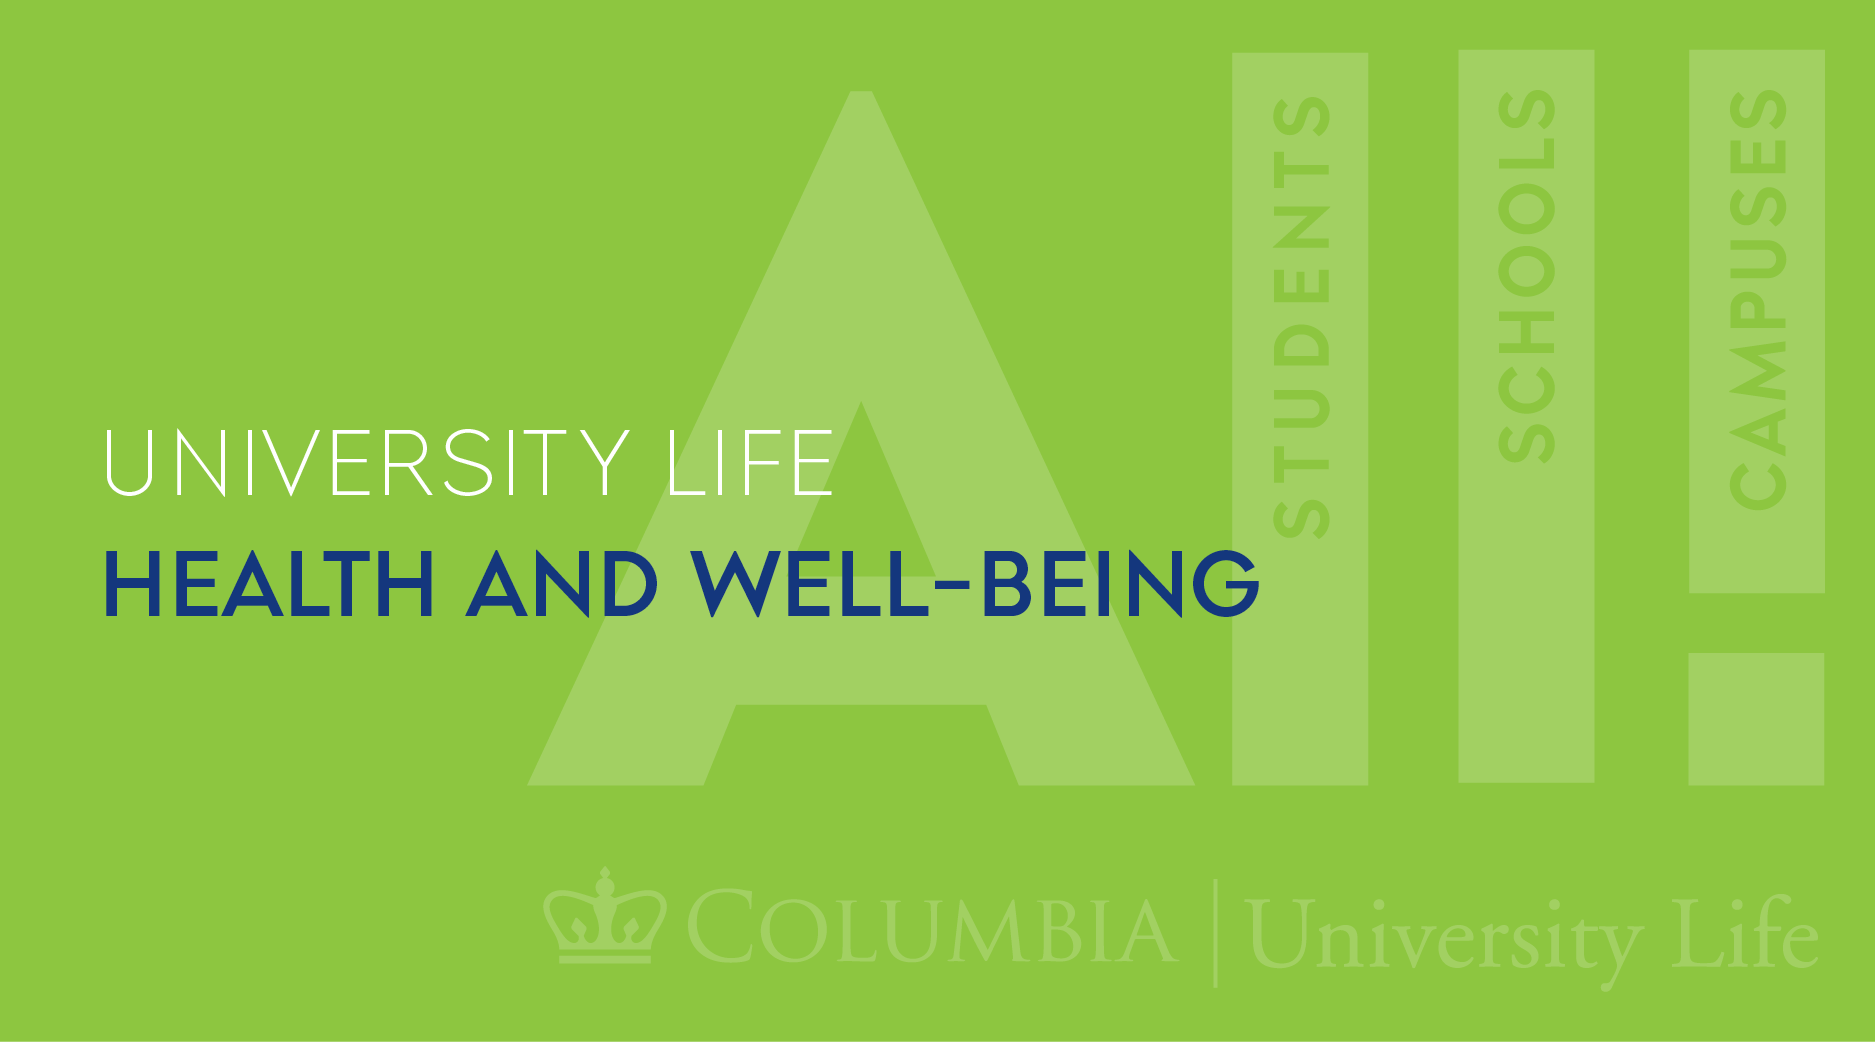 University Life
Health and Well-being
All Schools, Students, Campuses